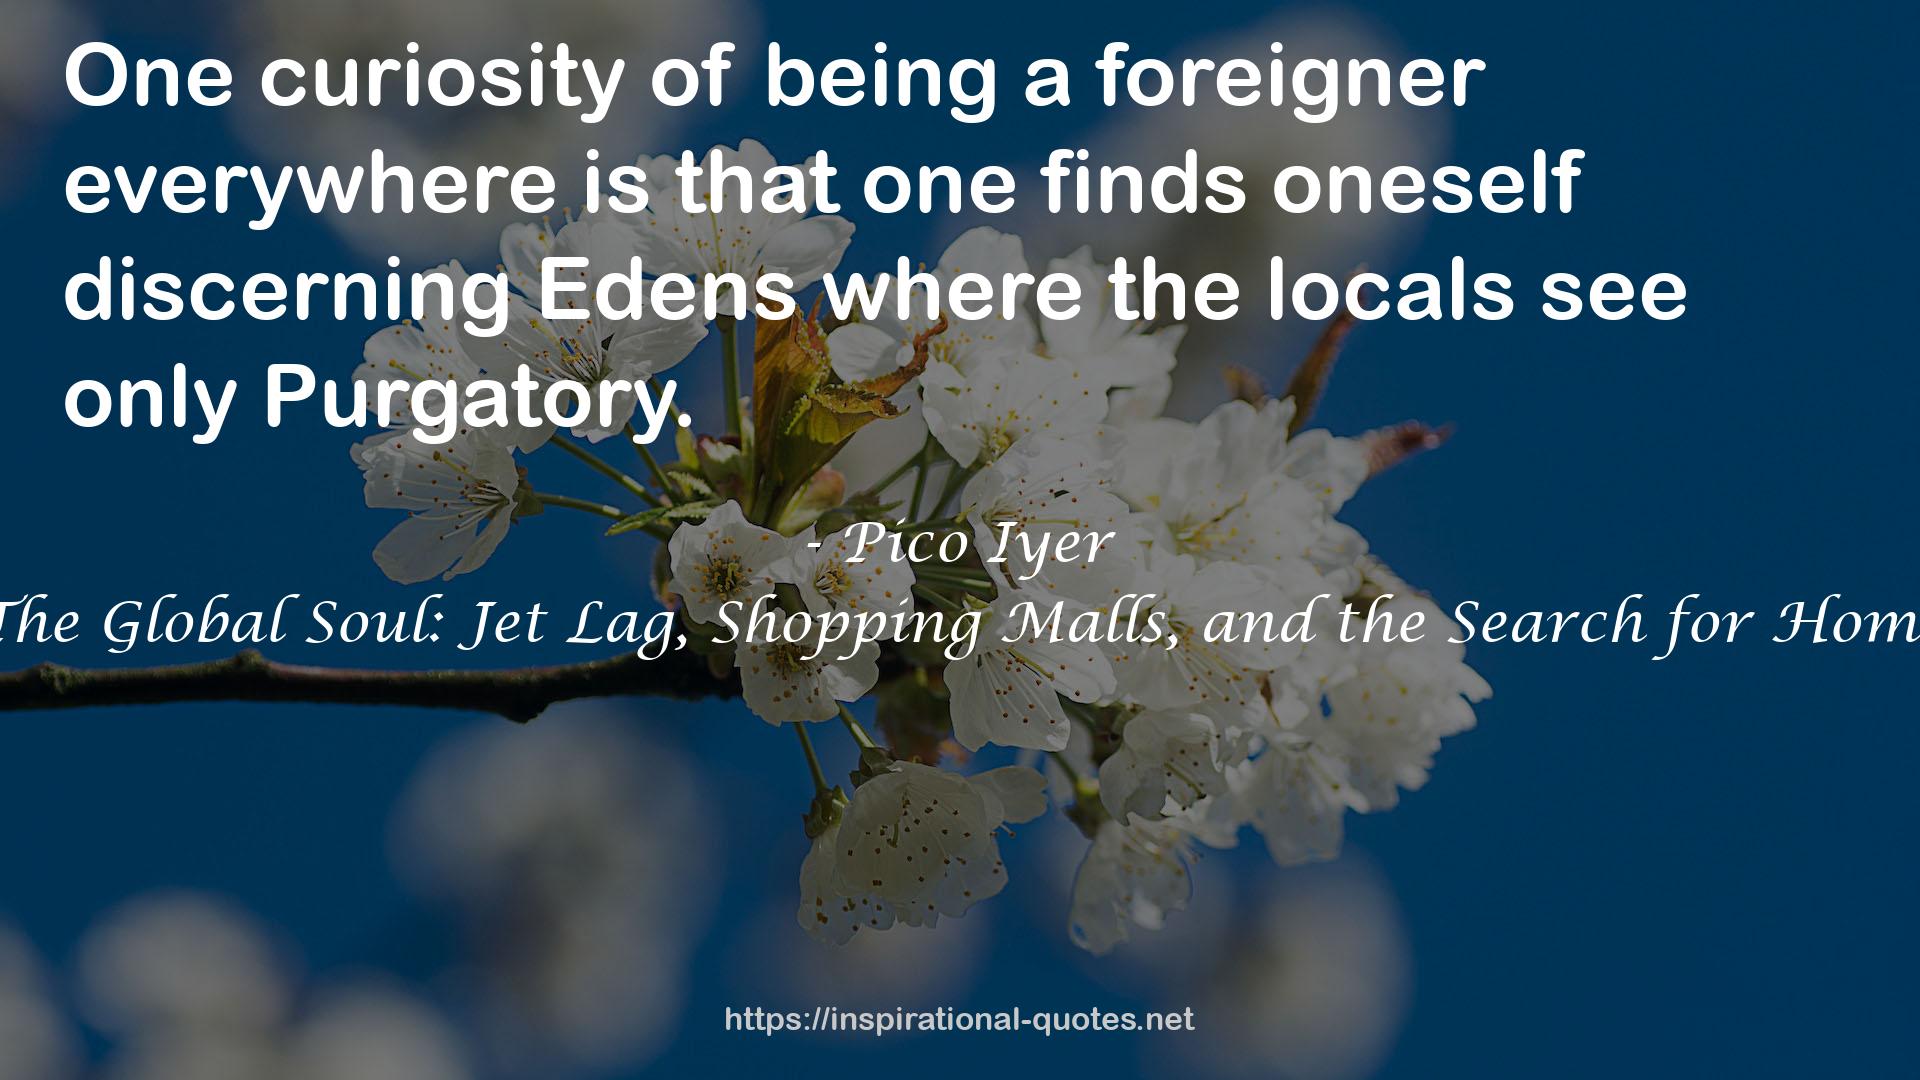 The Global Soul: Jet Lag, Shopping Malls, and the Search for Home QUOTES